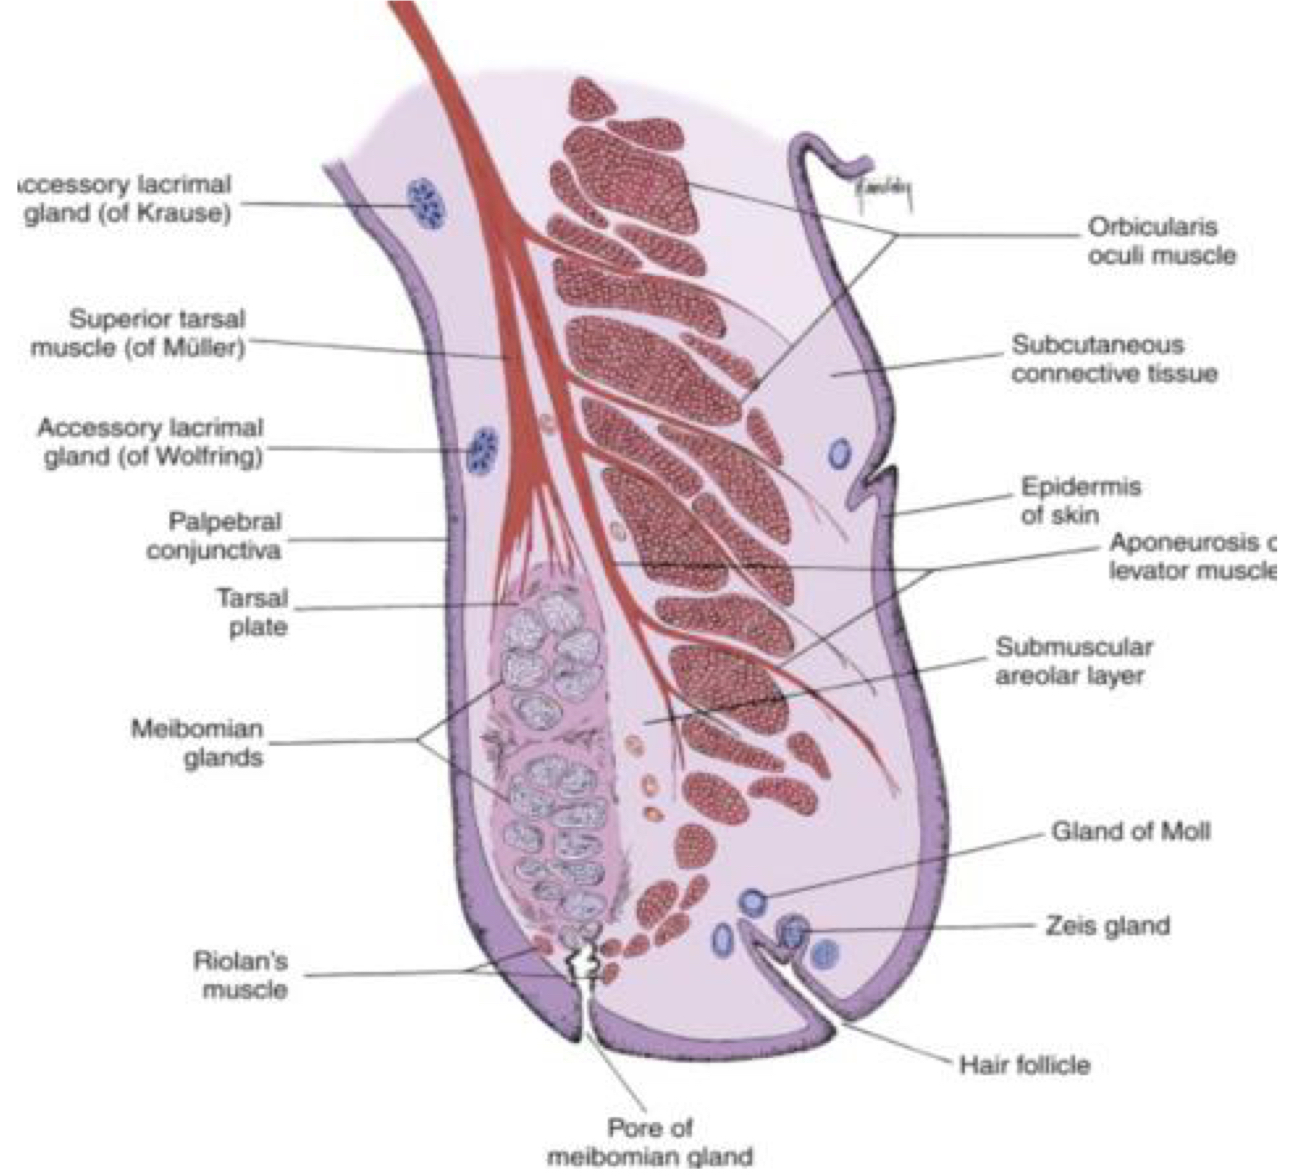 <p>1-mueller’s muscle 2- tarsal plate 3- meibomian glands 4- muscle of Riolan 5-orbicularis oculi 6-aponeurosis or levator muscle 7- gland of moll 8- Zeis gland</p>